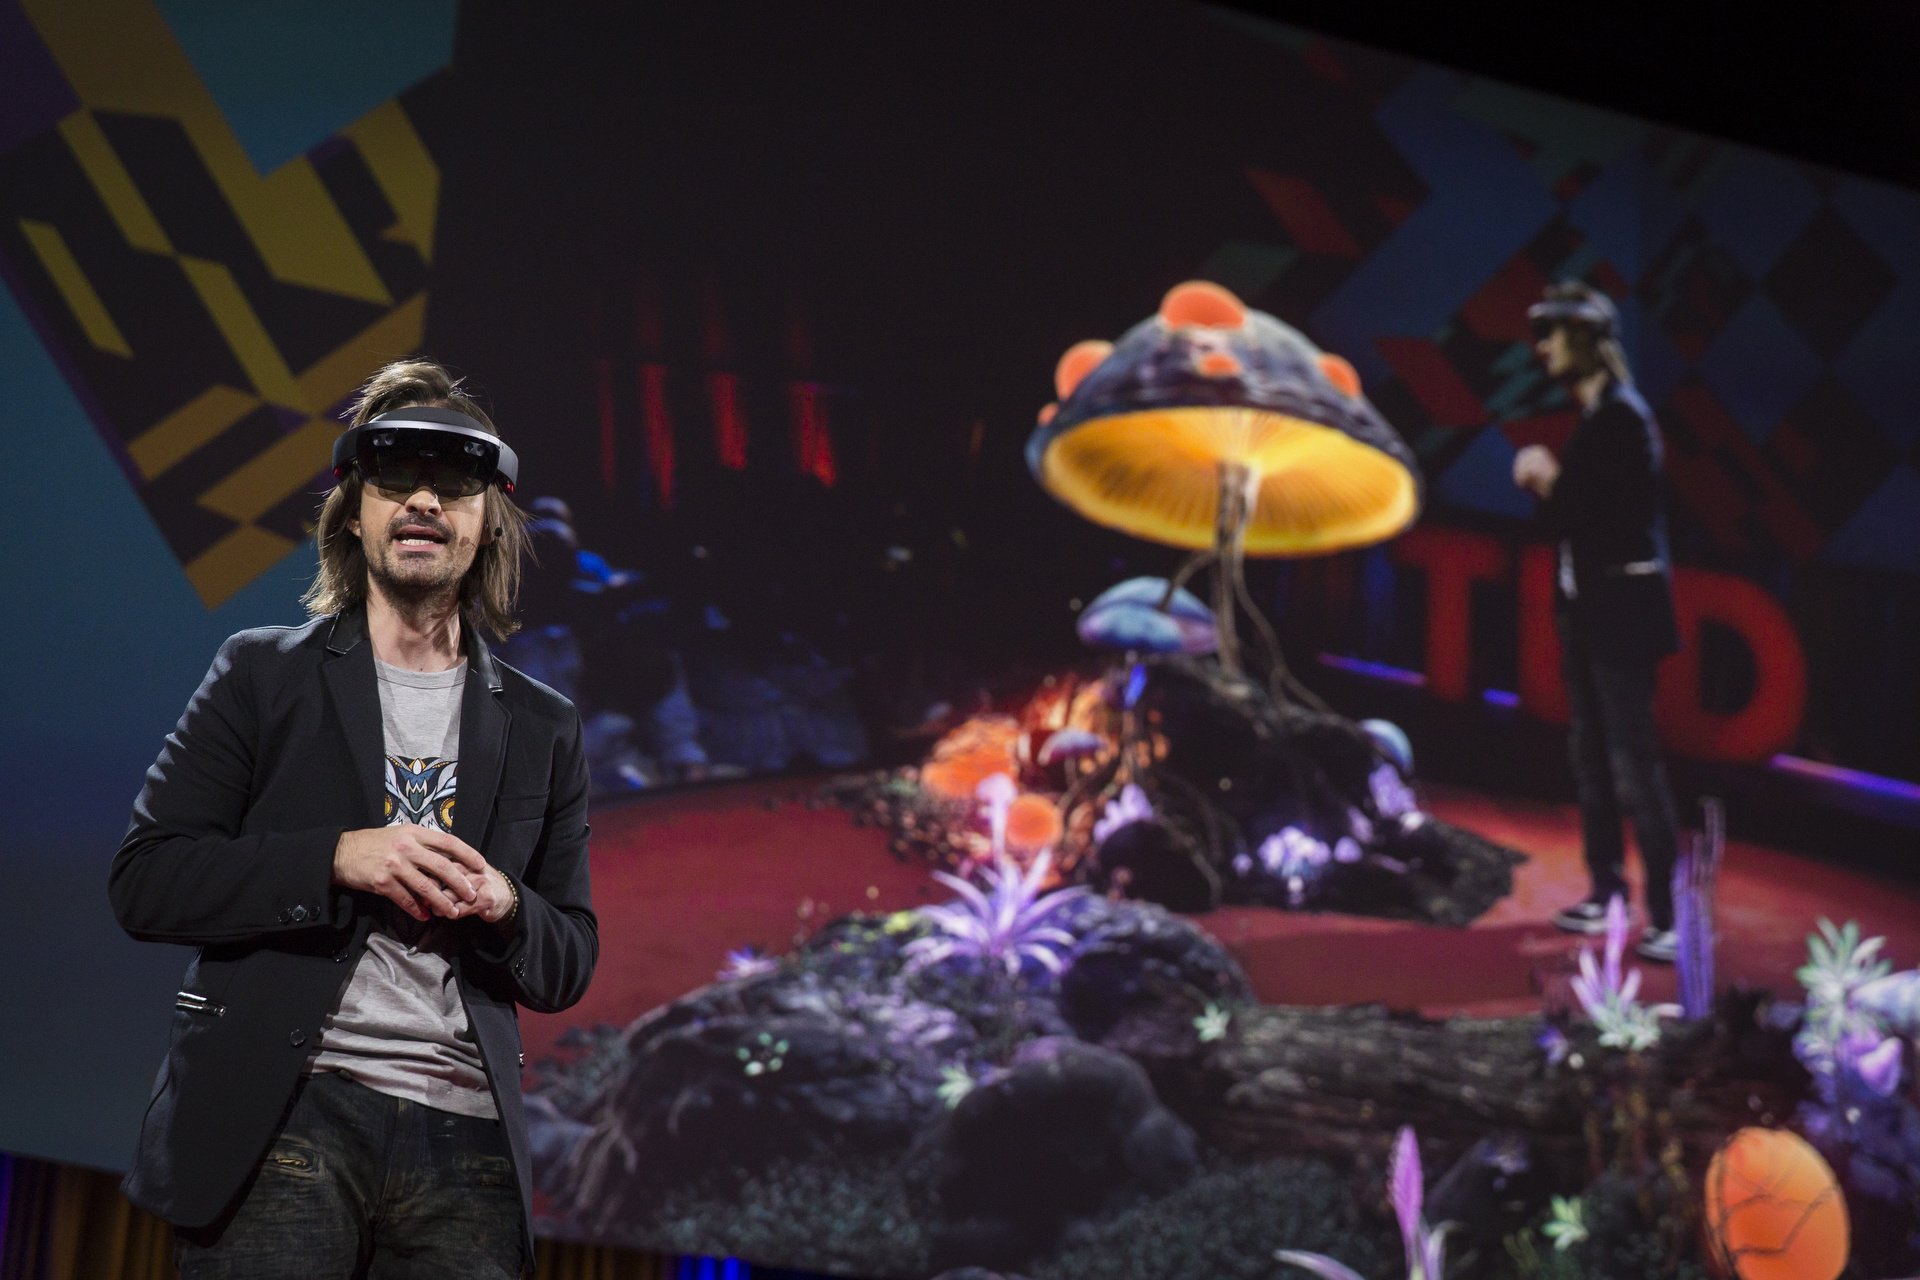 Alex Kipman speaks at TED2016 - Dream, February 15-19, 2016, Vancouver Convention Center, Vancouver, Canada. Photo: Bret Hartman / TED